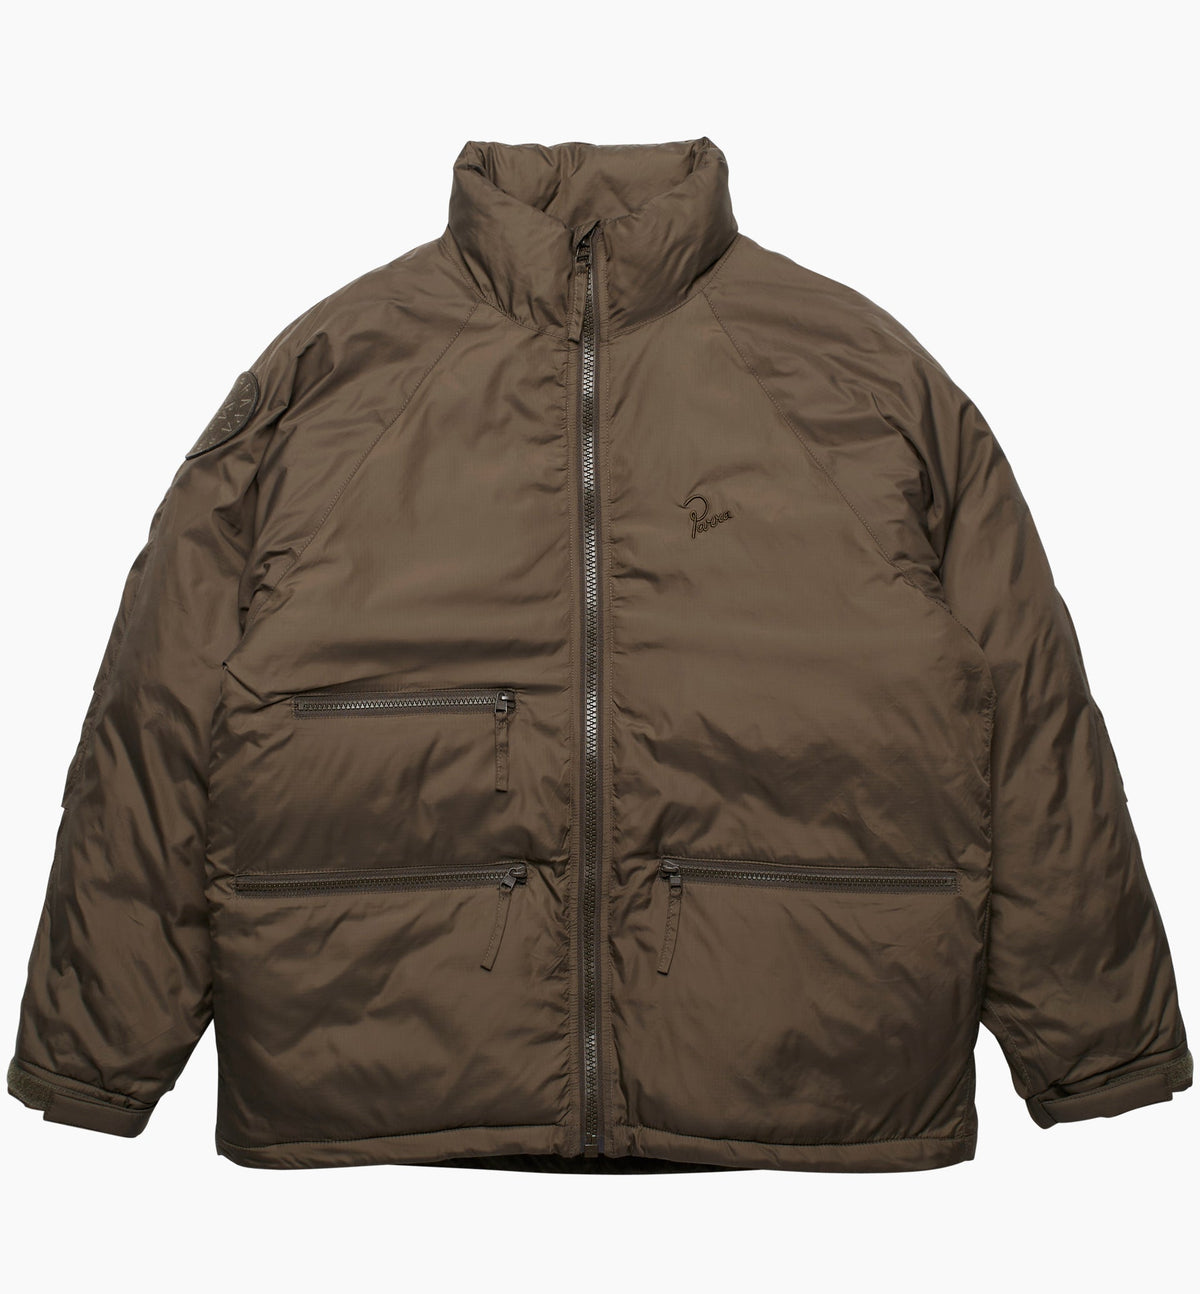 BY PARRA CANYONS ALL OVER JACKET